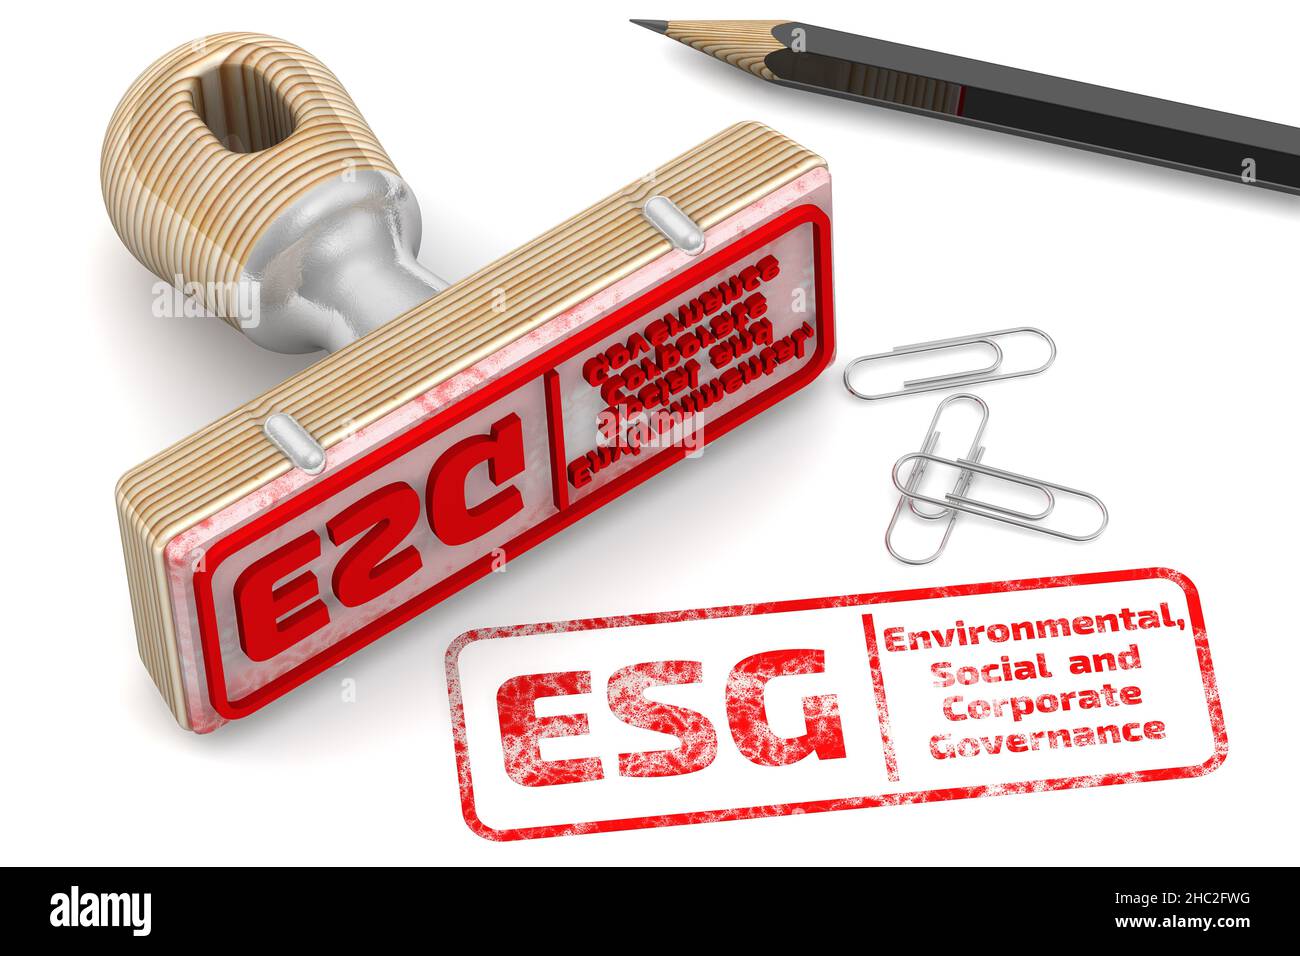 ESG. Environmental, Social and Corporate Governance. The stamp and an imprint Stock Photo